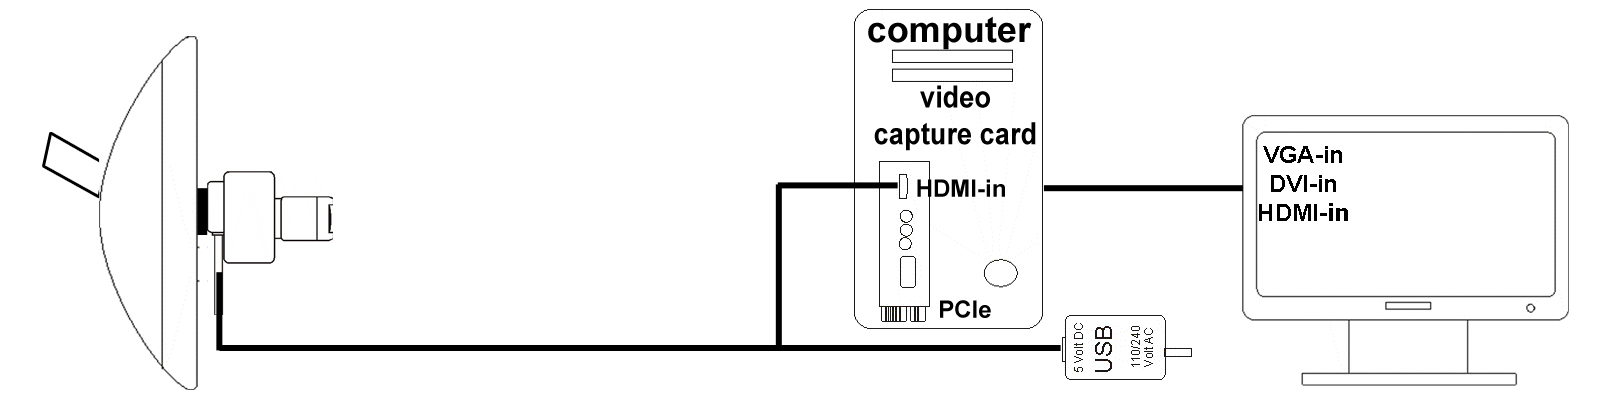 how-to-connect-thirdeye-uni-to-a-video-capture-card